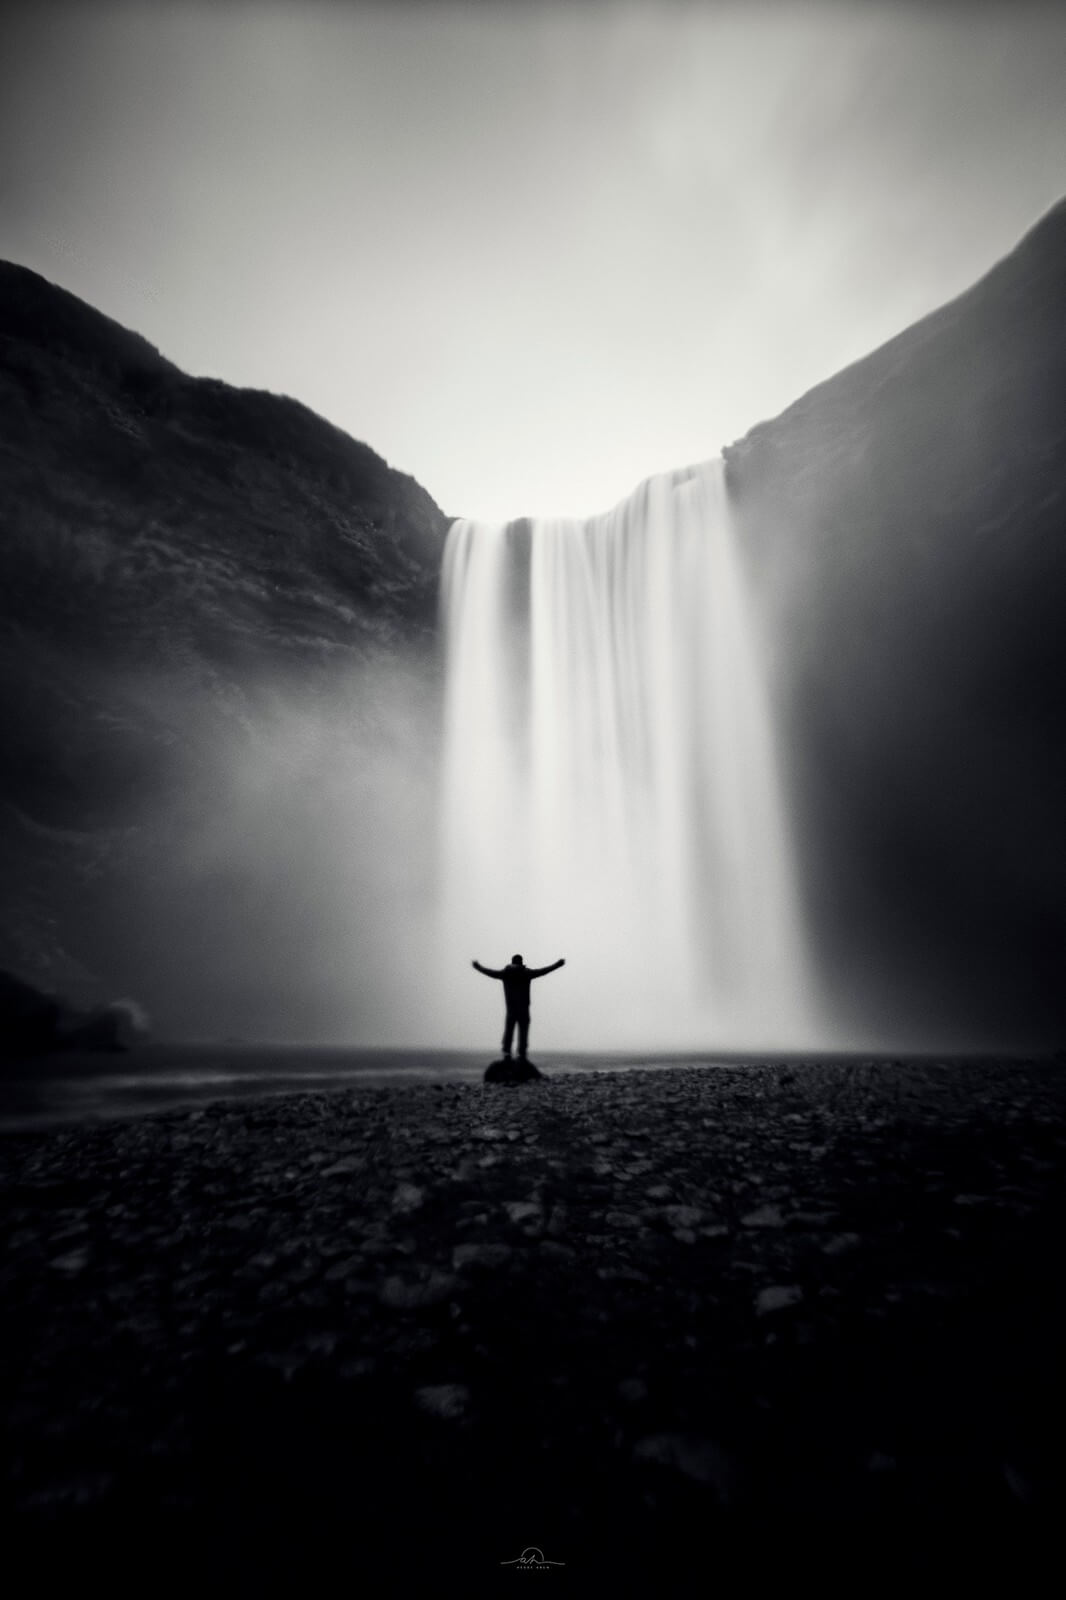 Iceland Experience Photography Expedition with Arun Hegden